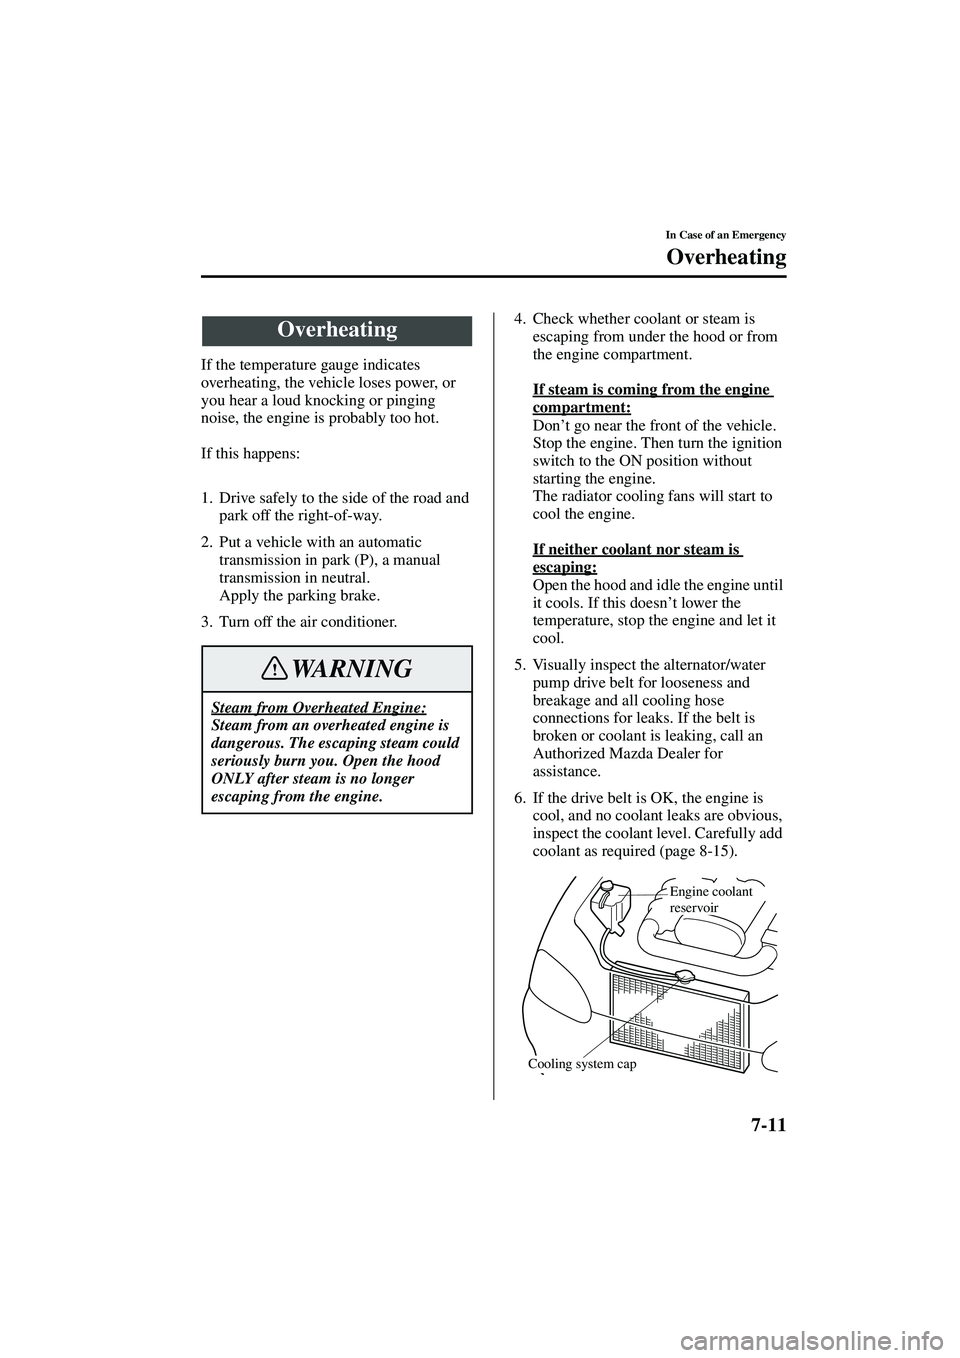 MAZDA MODEL MX-5 MIATA 2003  Owners Manual 7-11
In Case of an Emergency
Form No. 8R09-EA-02G
Overheating
If the temperature gauge indicates 
overheating, the vehicle loses power, or 
you hear a loud knocking or pinging 
noise, the engine is pr